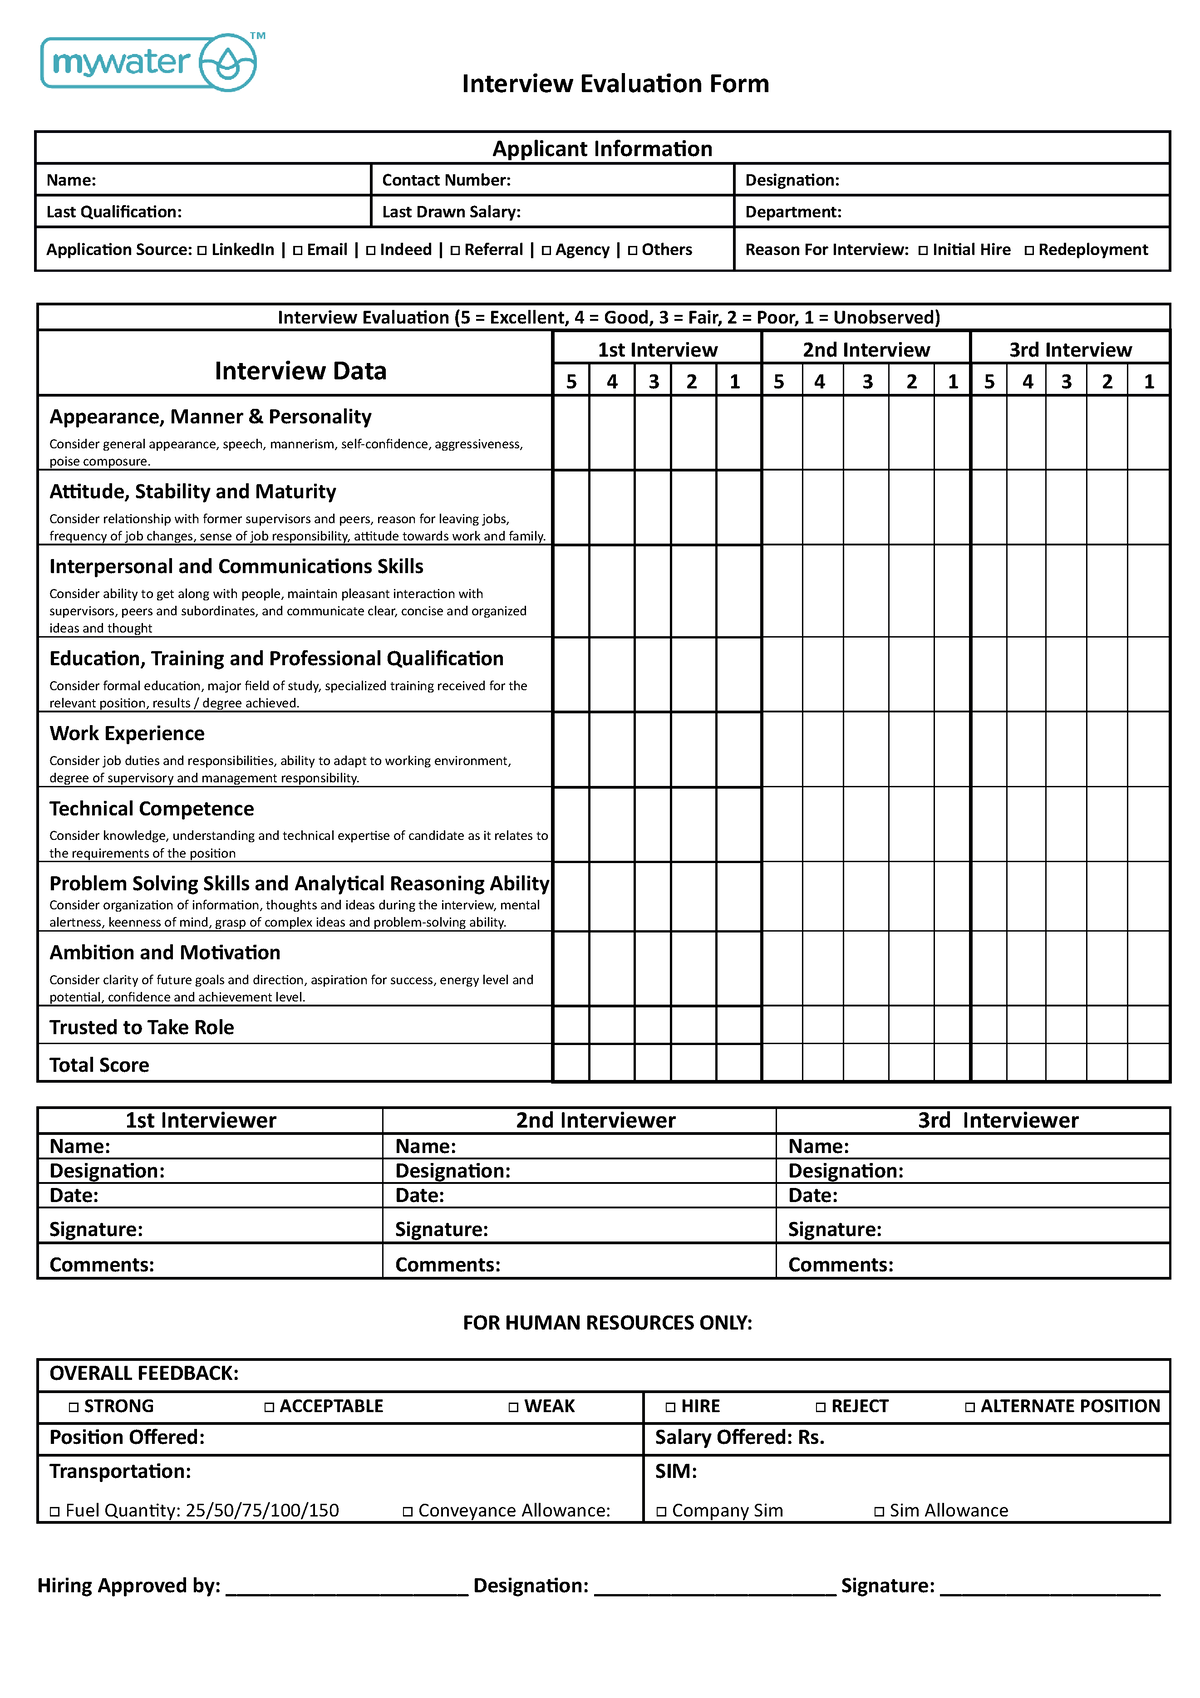 Interview Evaluation Form - Final - Interview Evaluation Form Applicant ...